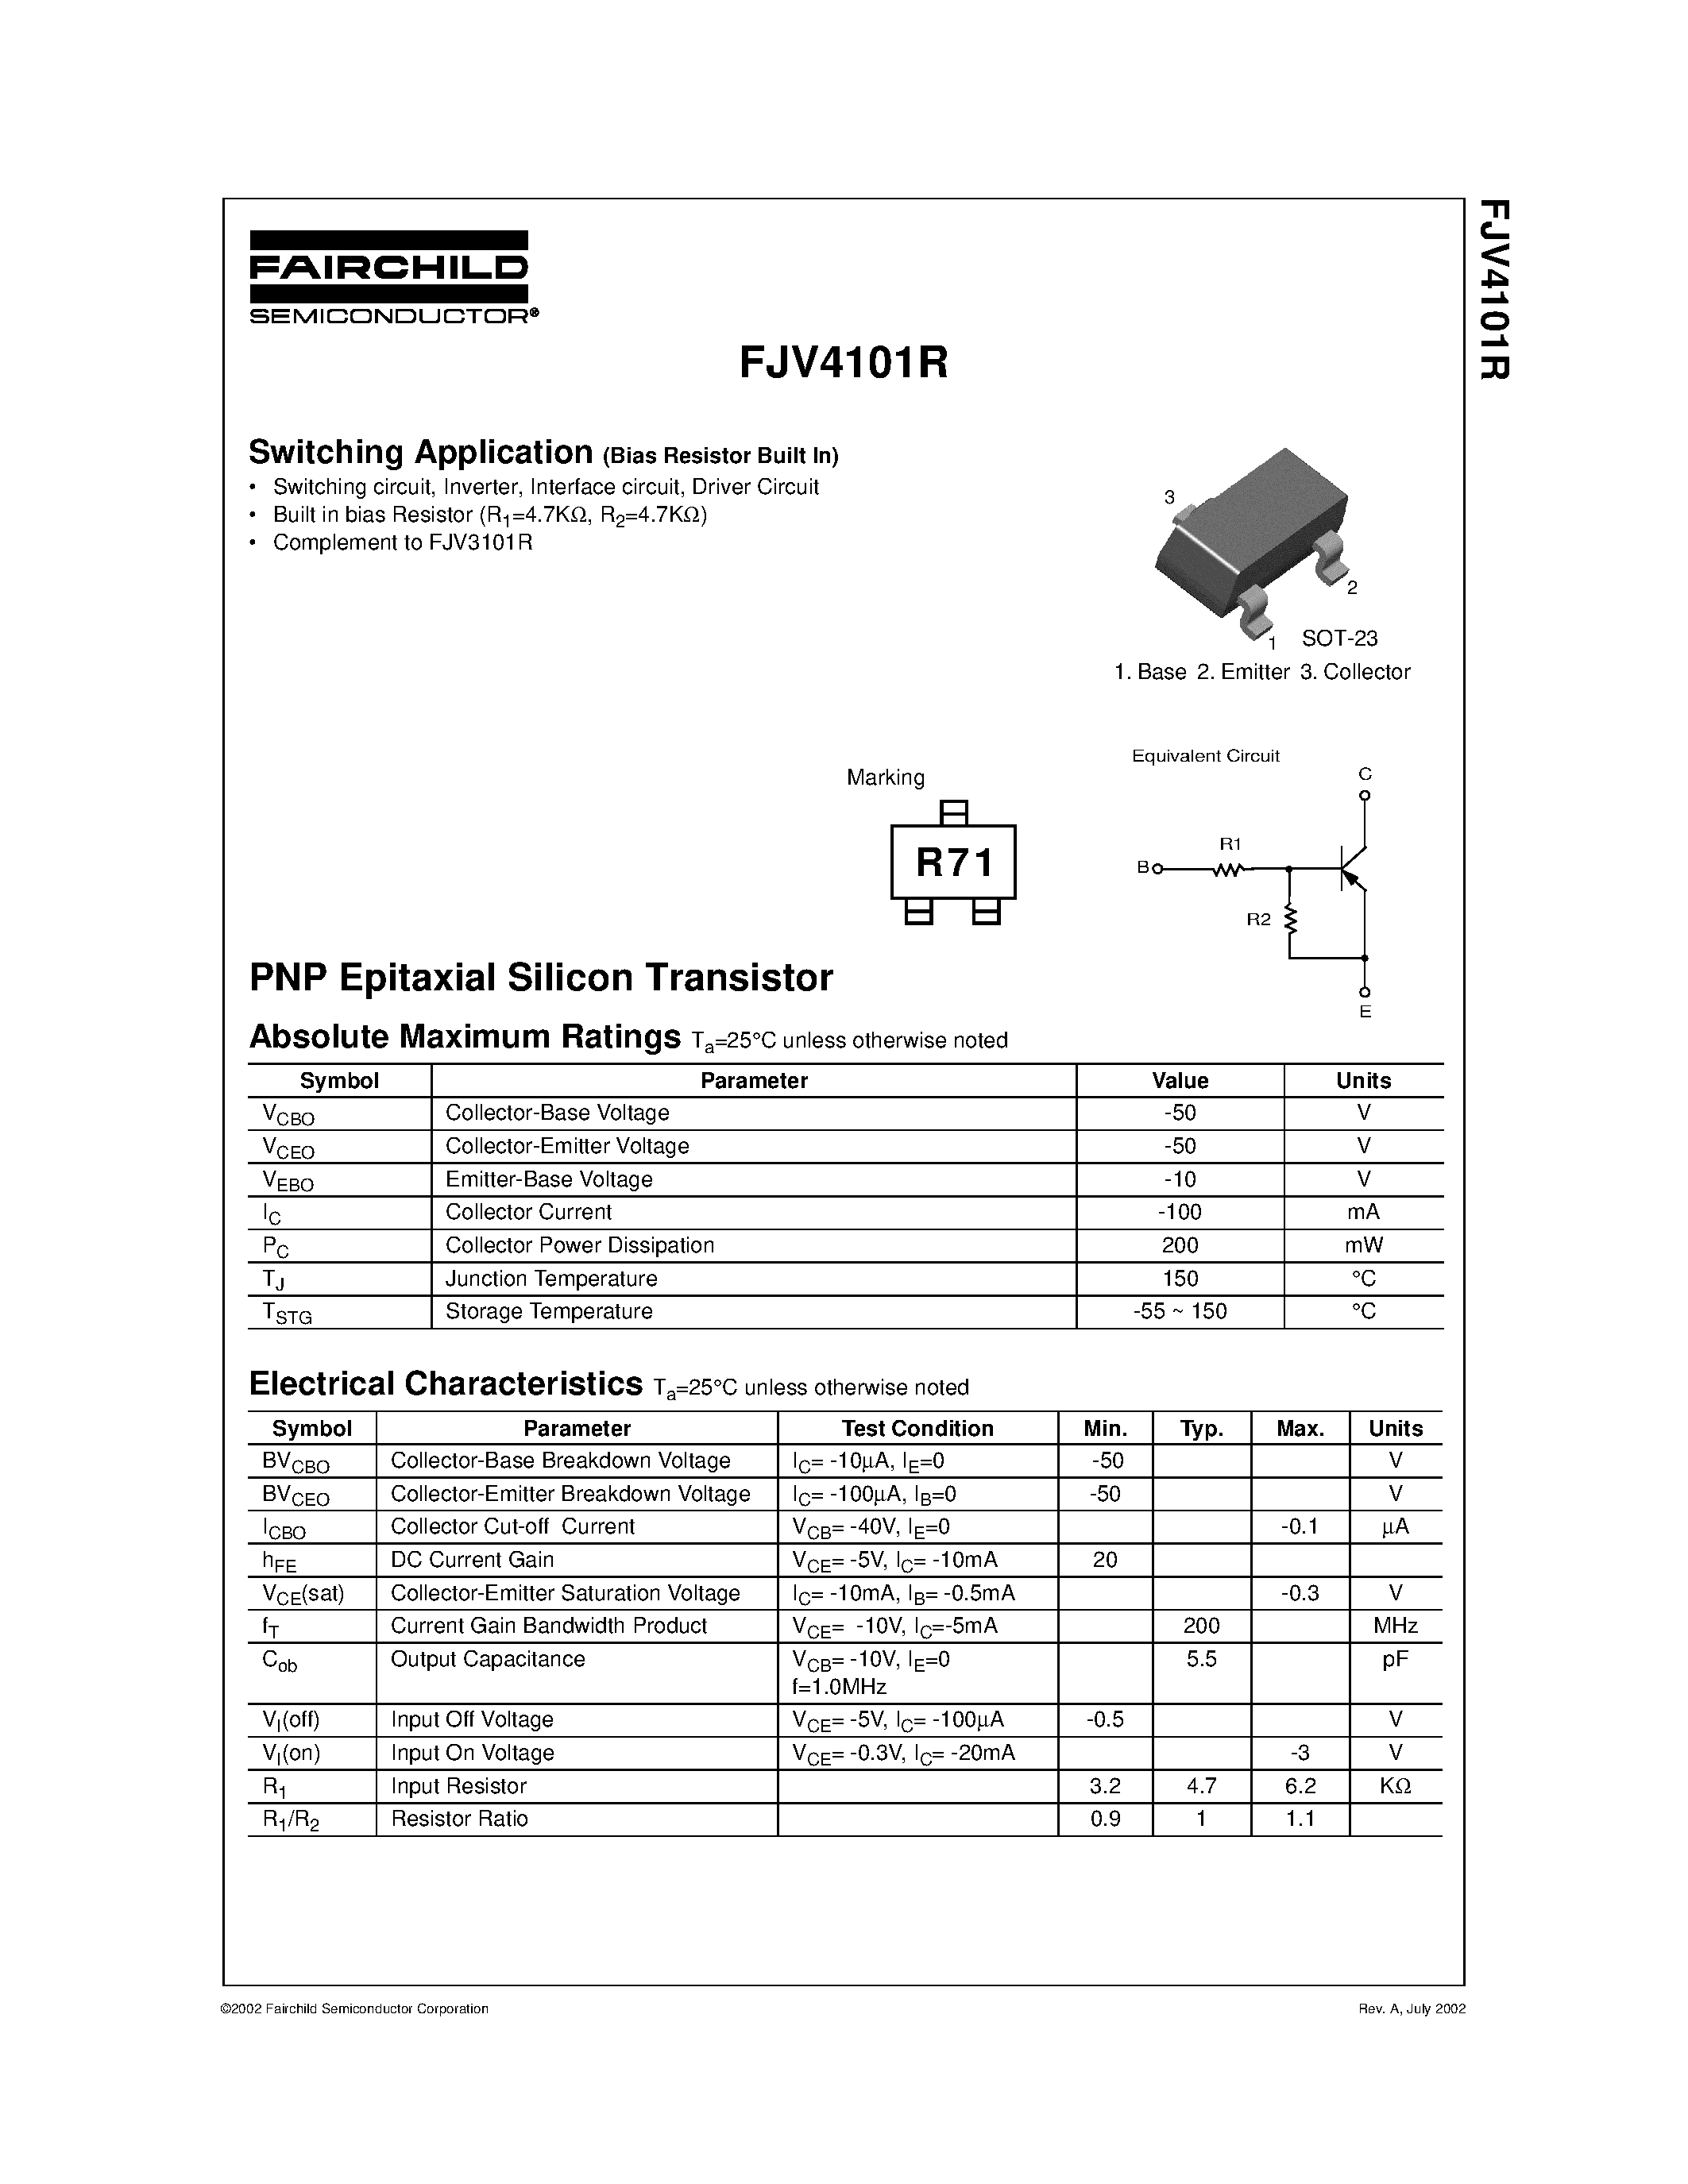 Datasheet FJV4101R - PNP Epitaxial Silicon Transistor page 1